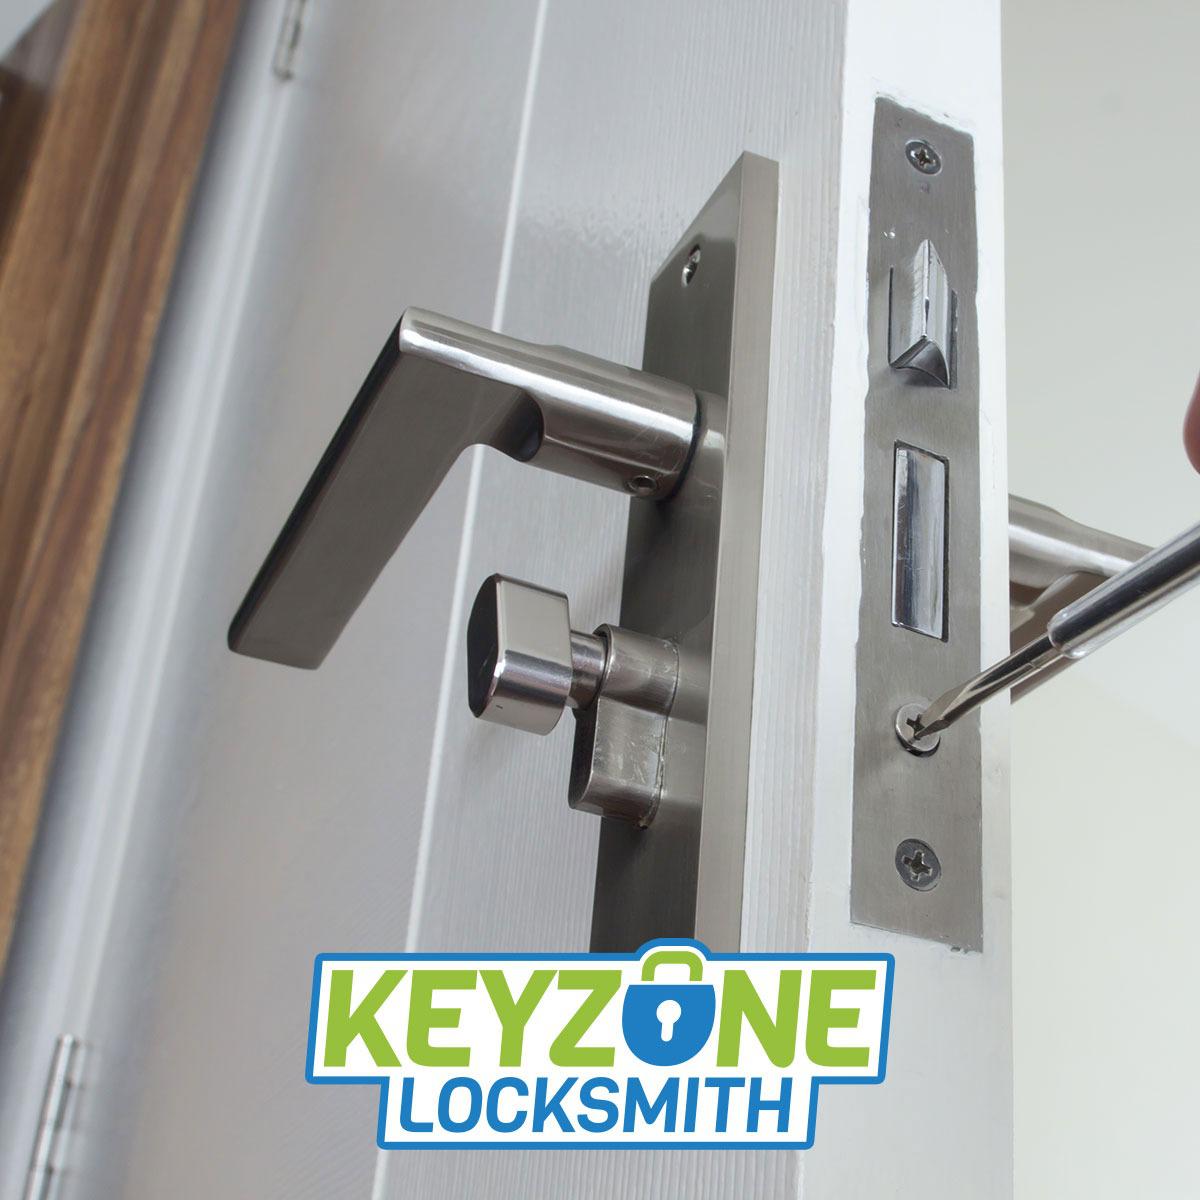 Automotive Locksmith

We are the most reliable automotive locksmith services provider in Canoga Park. If you ever find yourself locked out of your car or can’t seem to find your car keys, then call us today